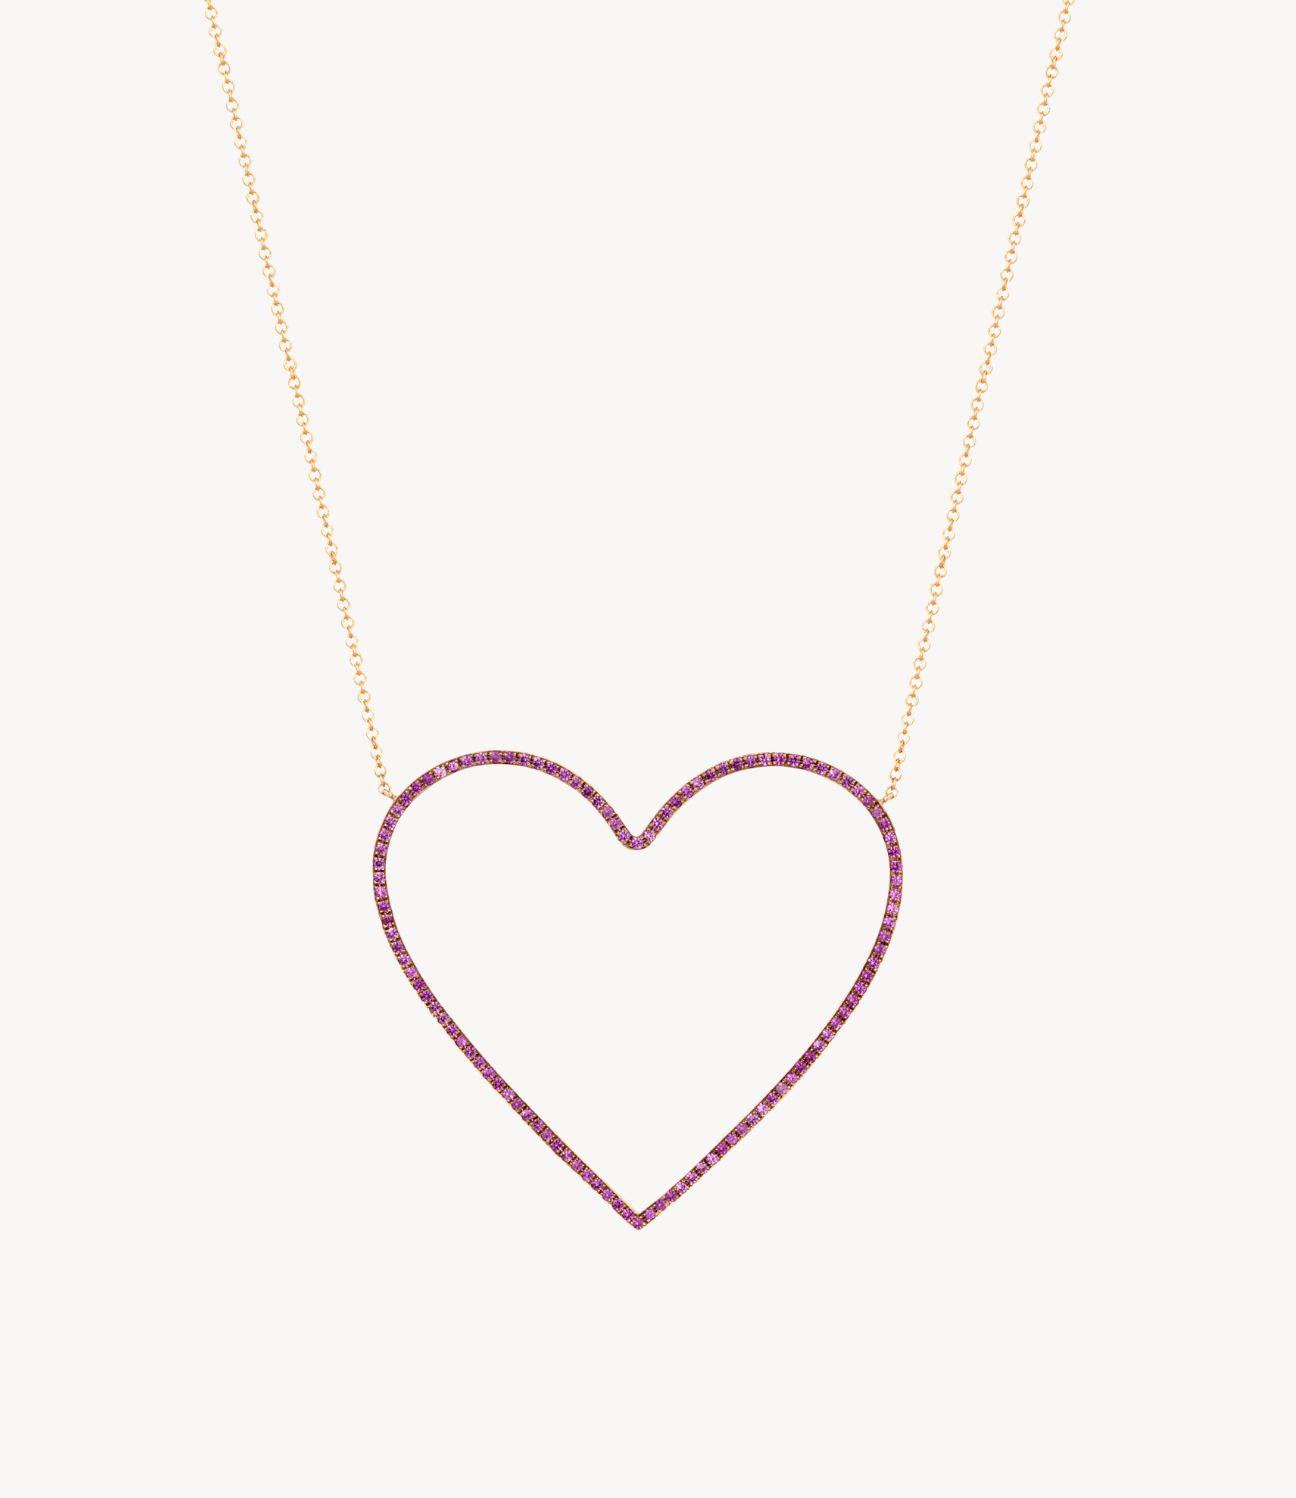 Giant Pink Sapphire Heart Necklace - Roxanne First